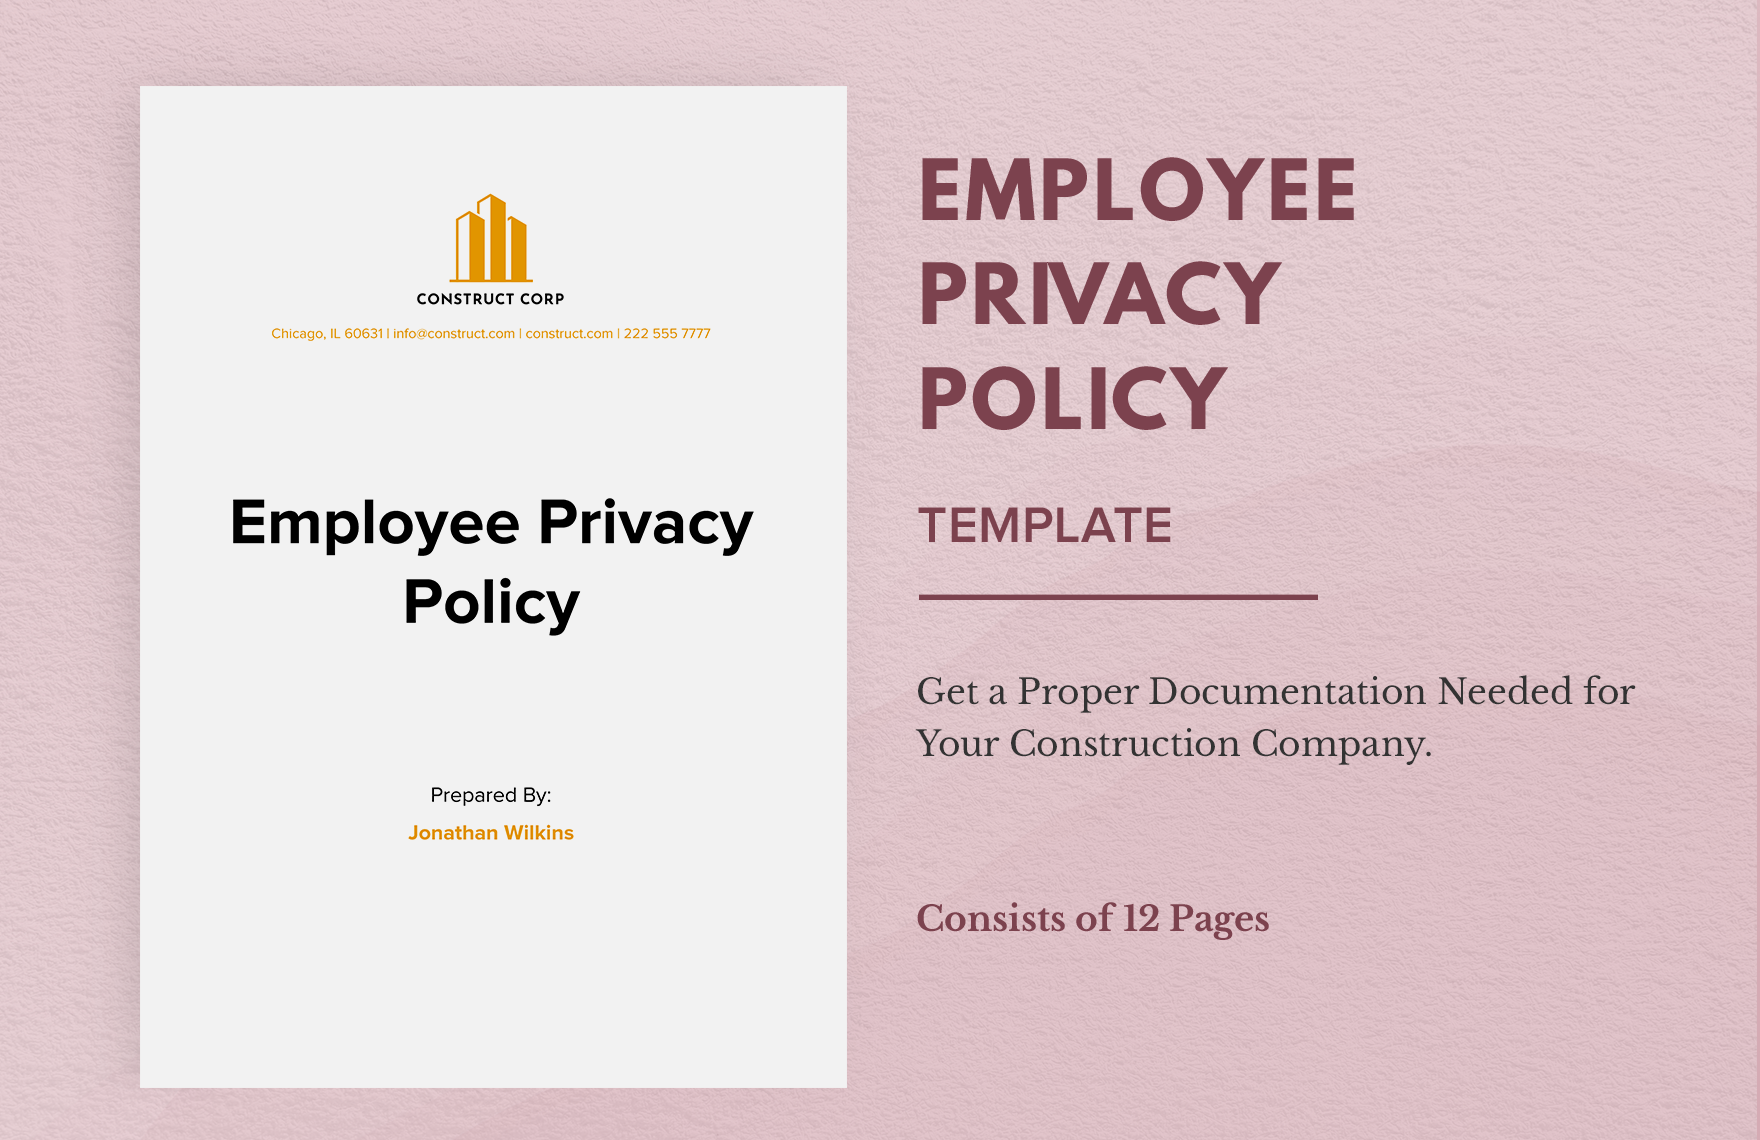 Employee Privacy Policy Template in Word, Google Docs